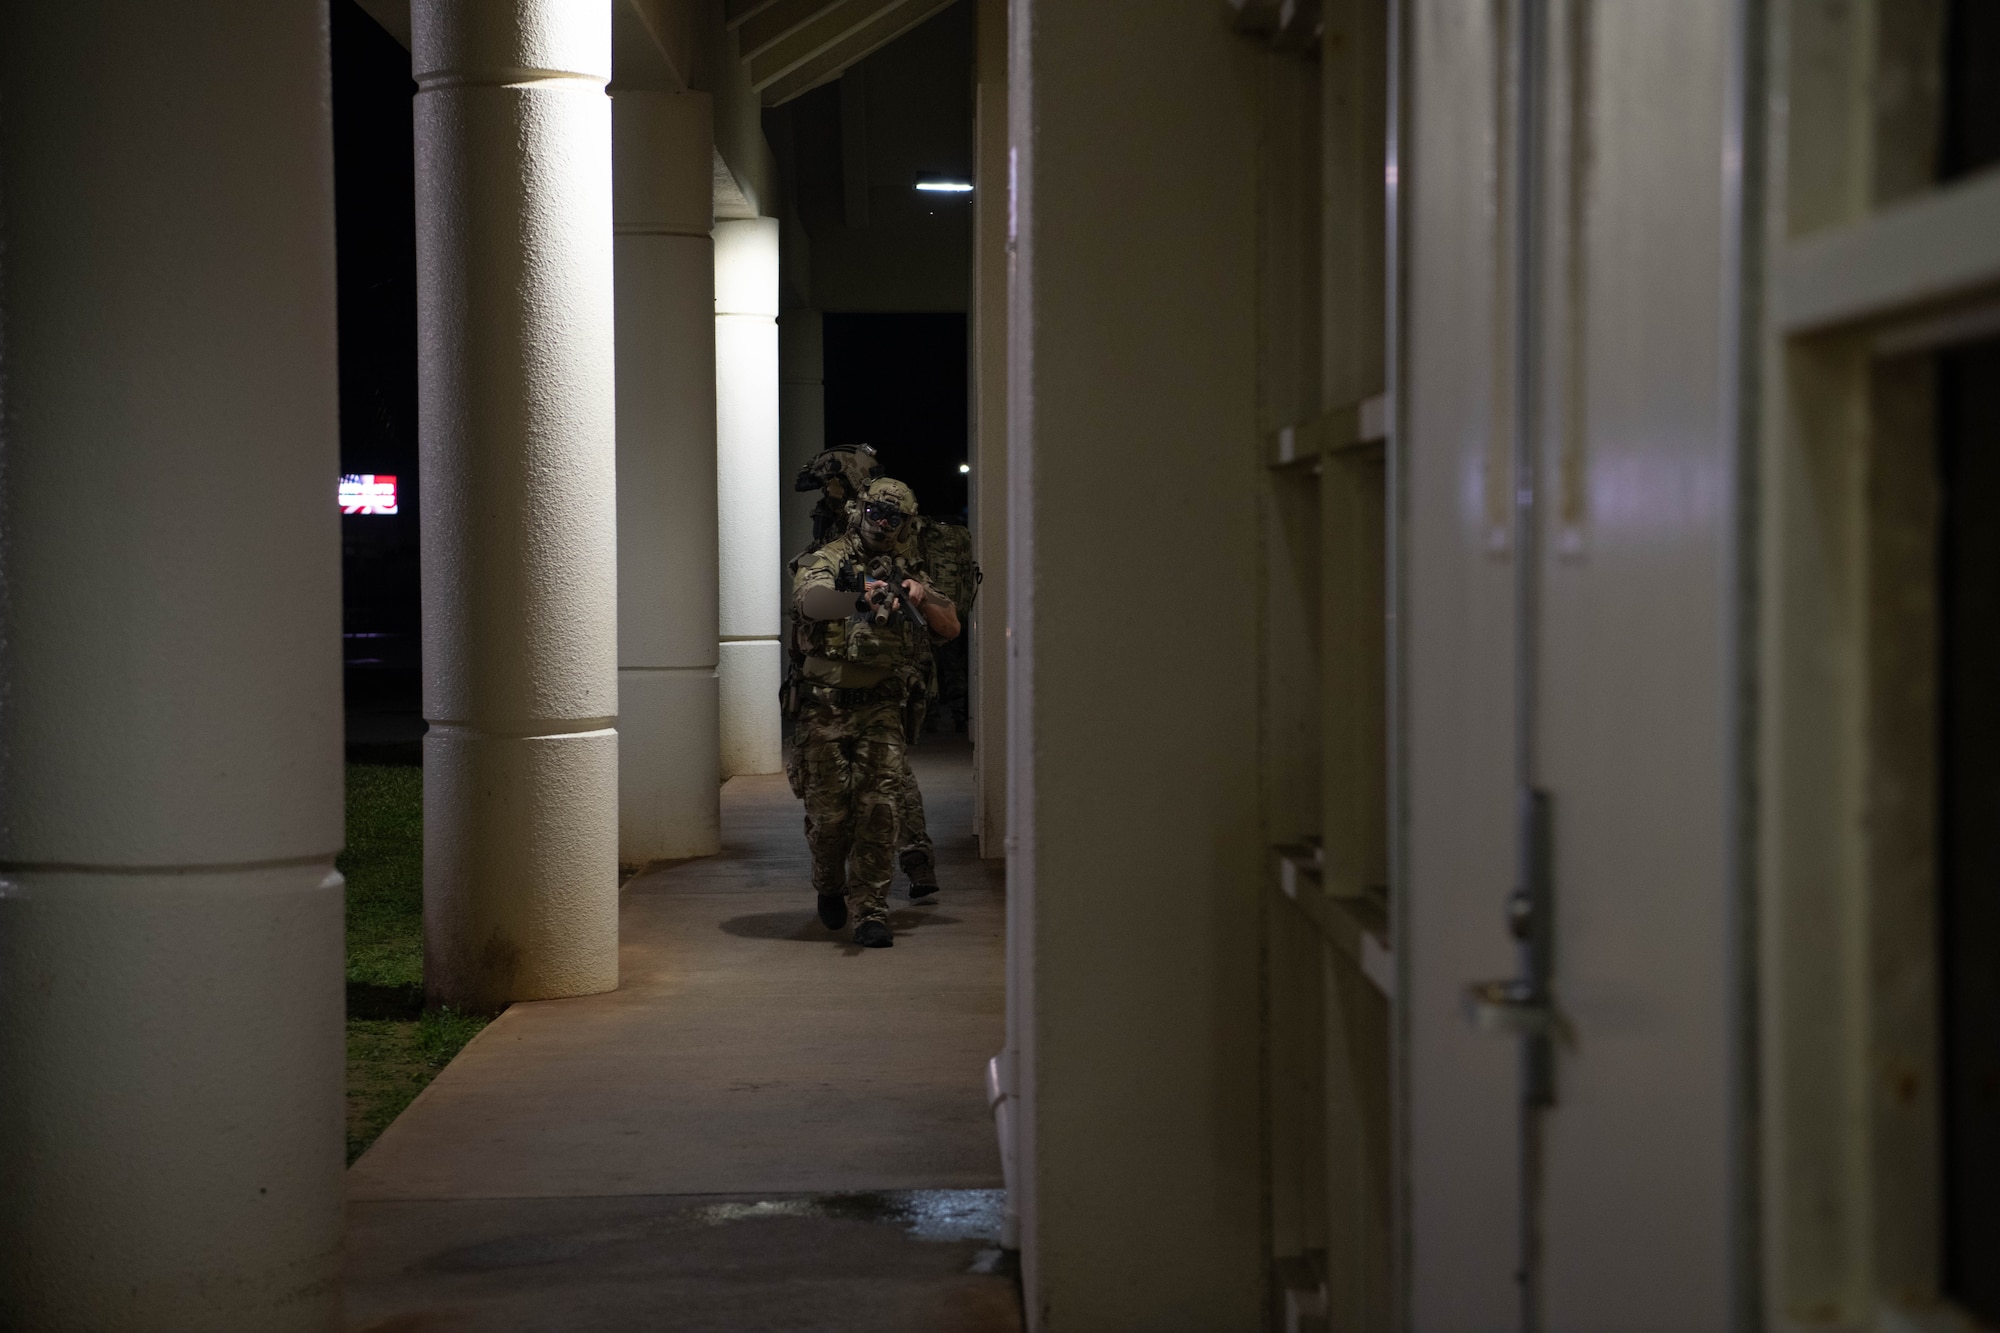 Green Berets secure outside of building.